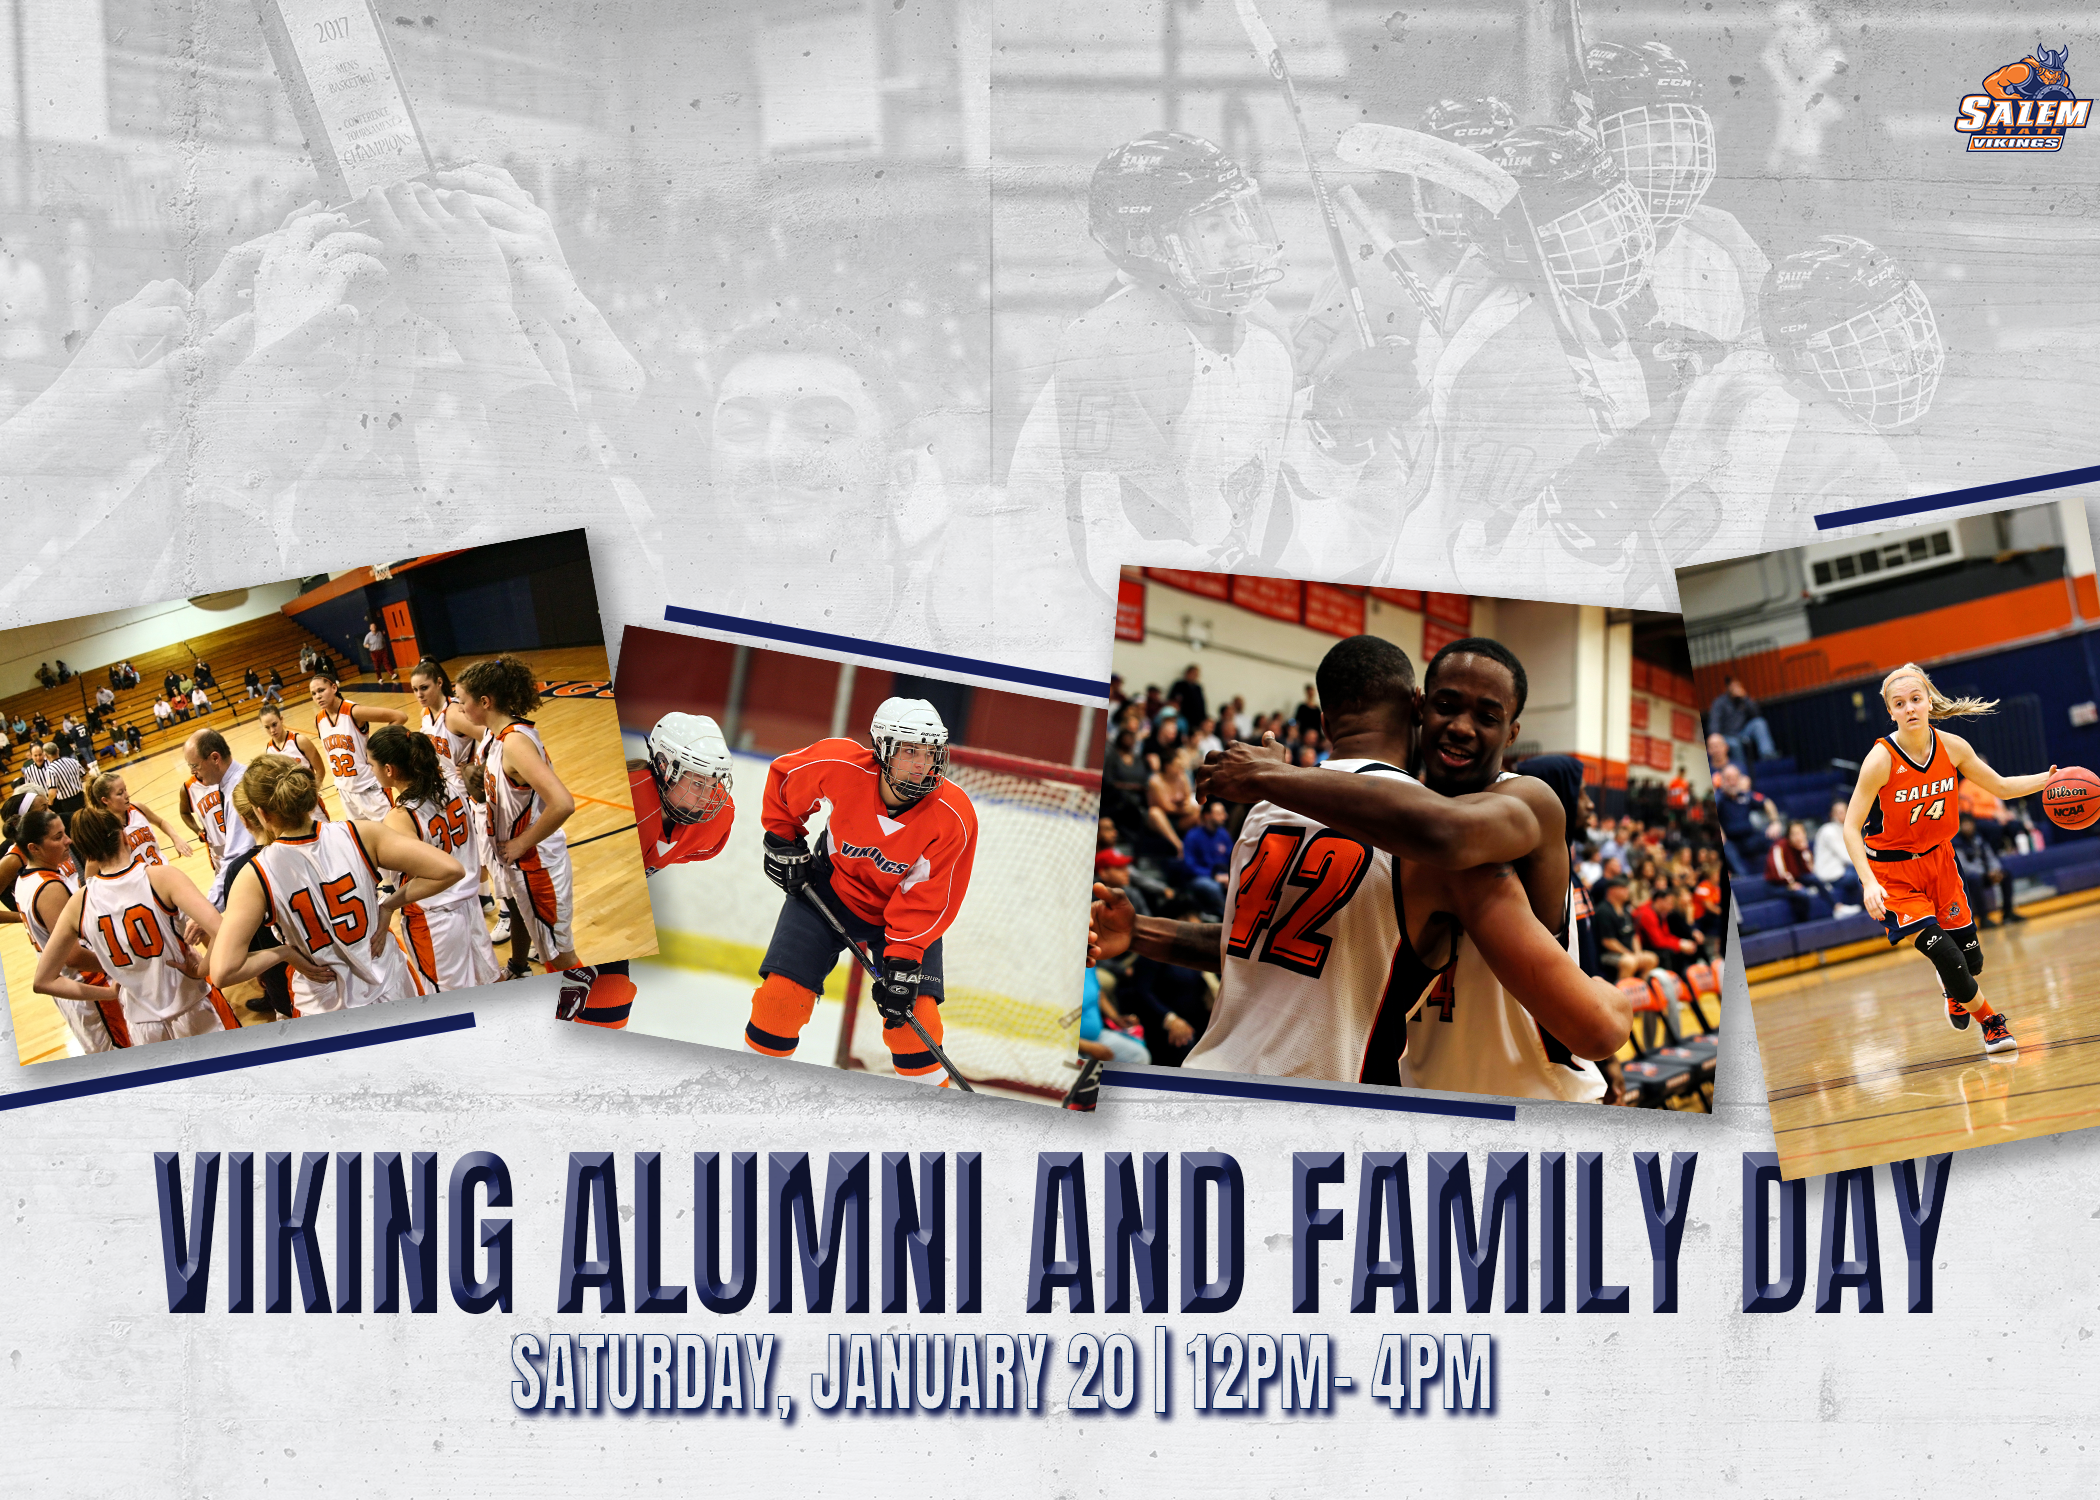 Join us on Saturday, January 20th for our Viking Alumni and Family Day